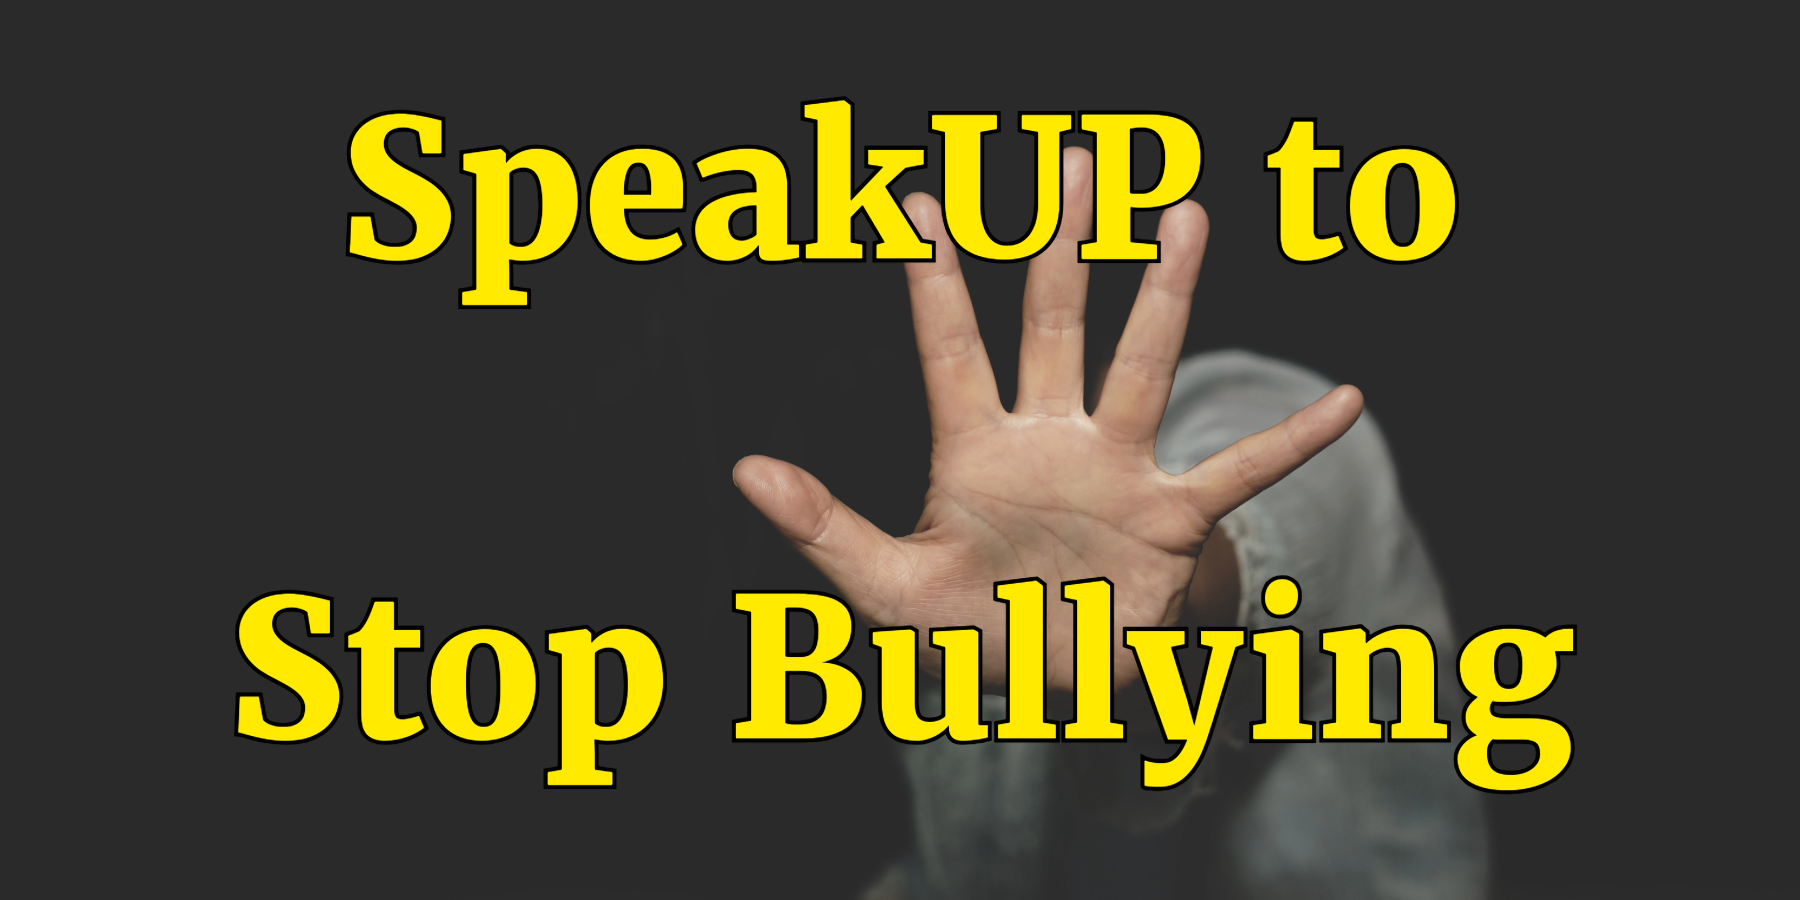 SpeakUP to Stop Bullying